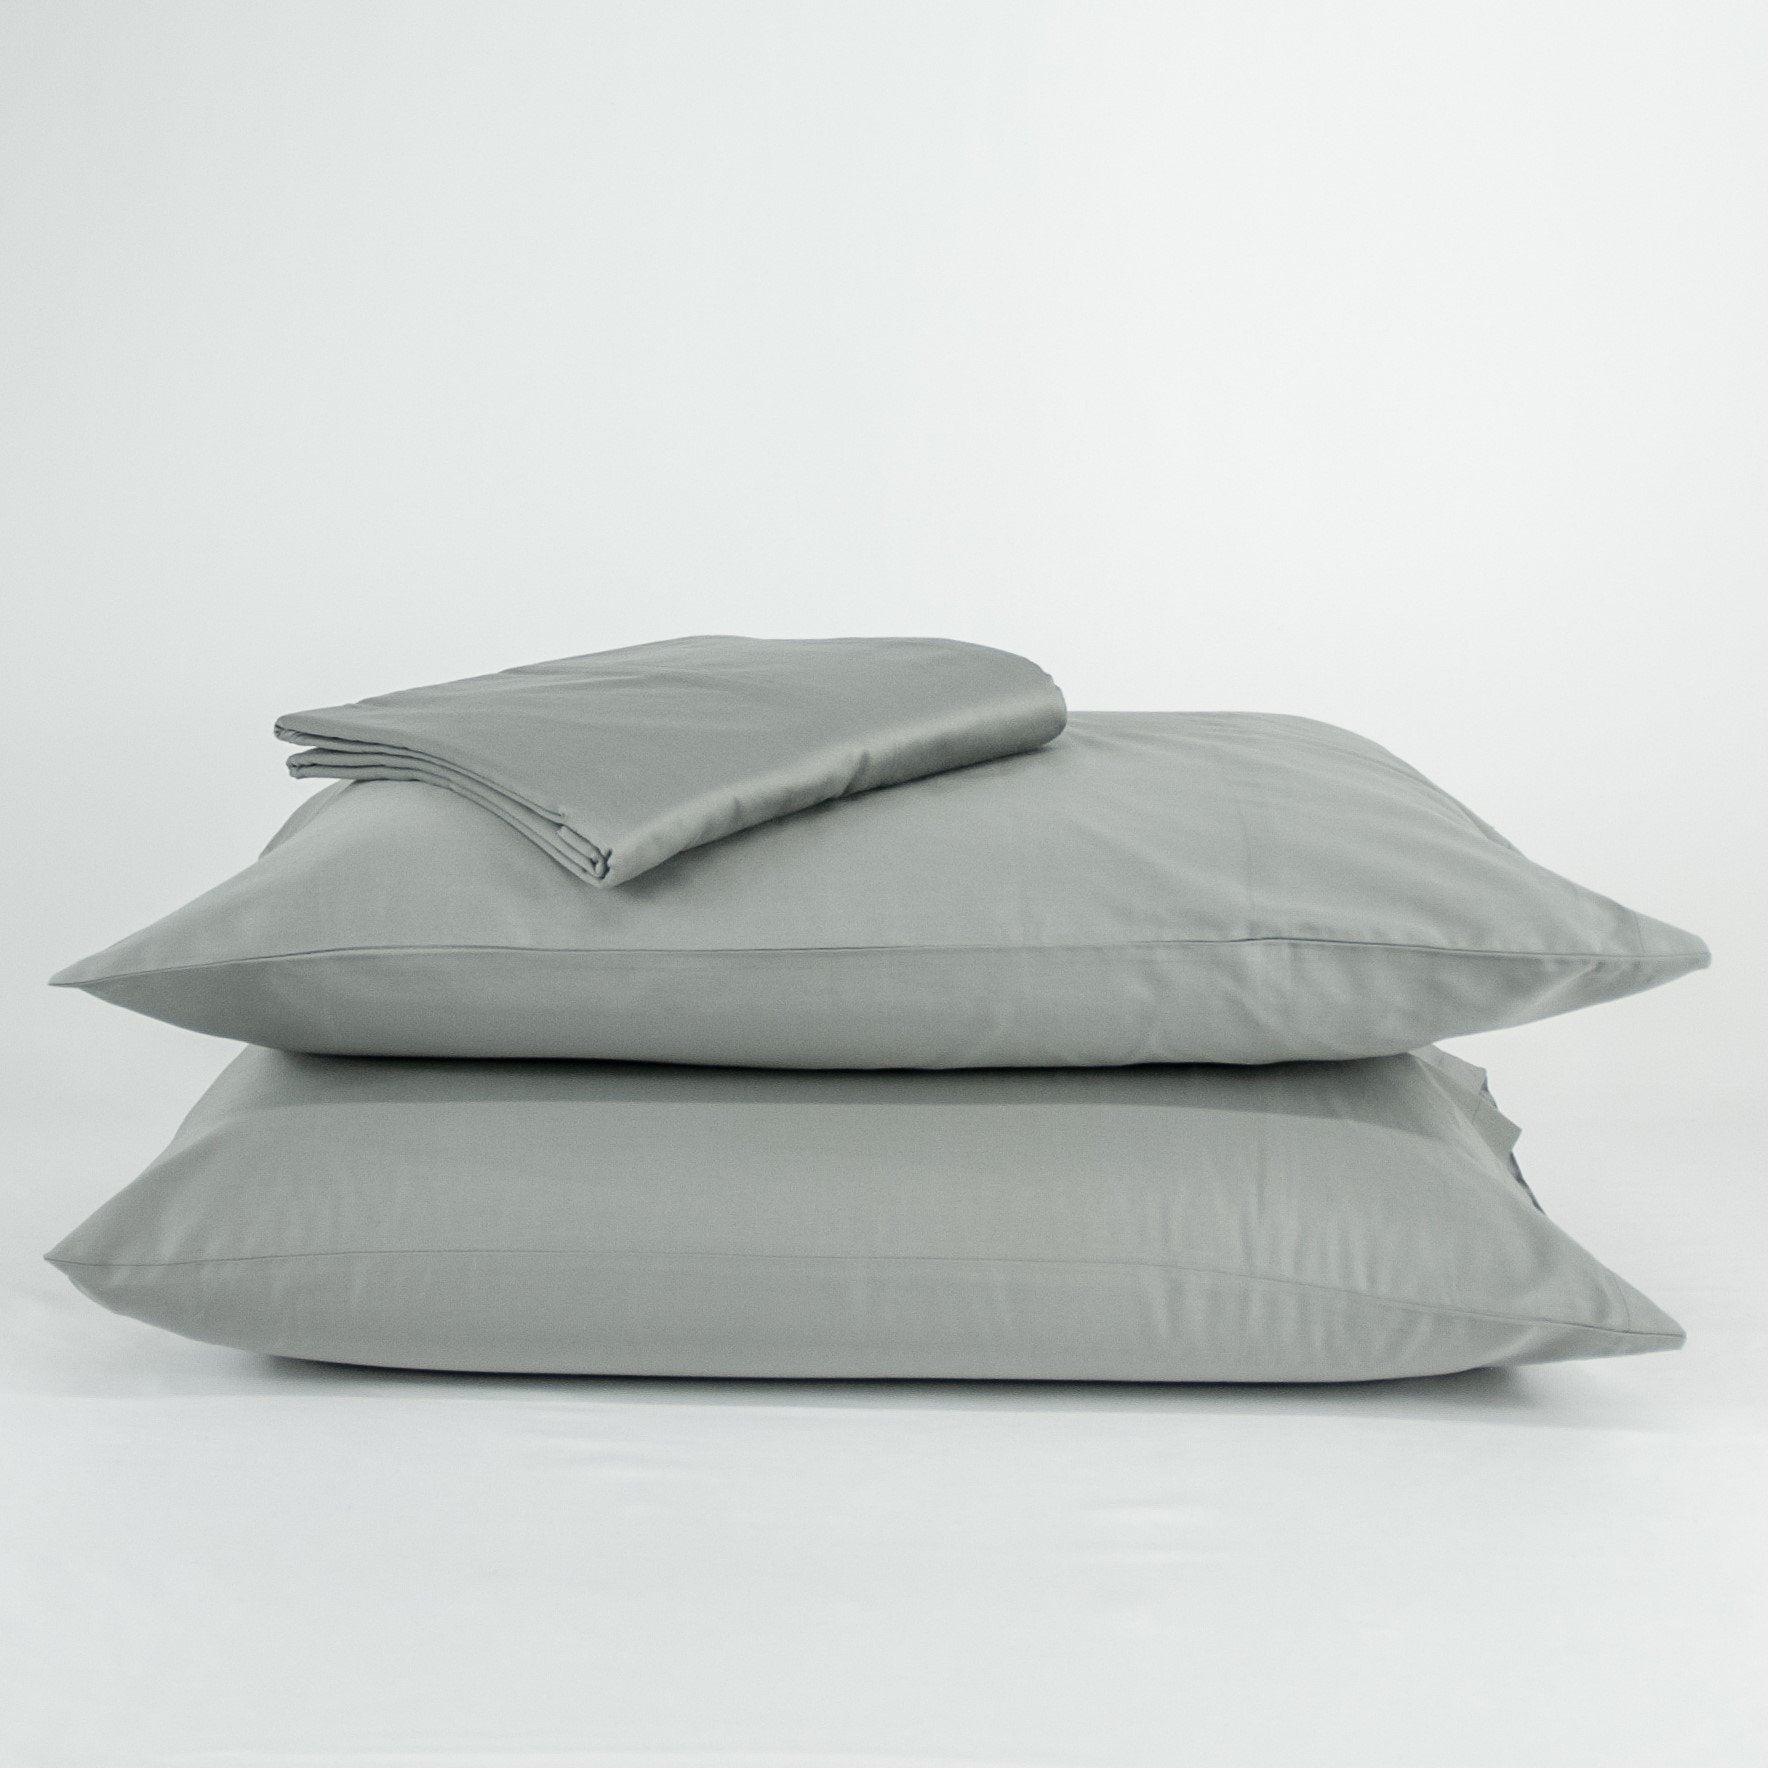 Stacked organic cotton pillowcases and sheets in sleet grey